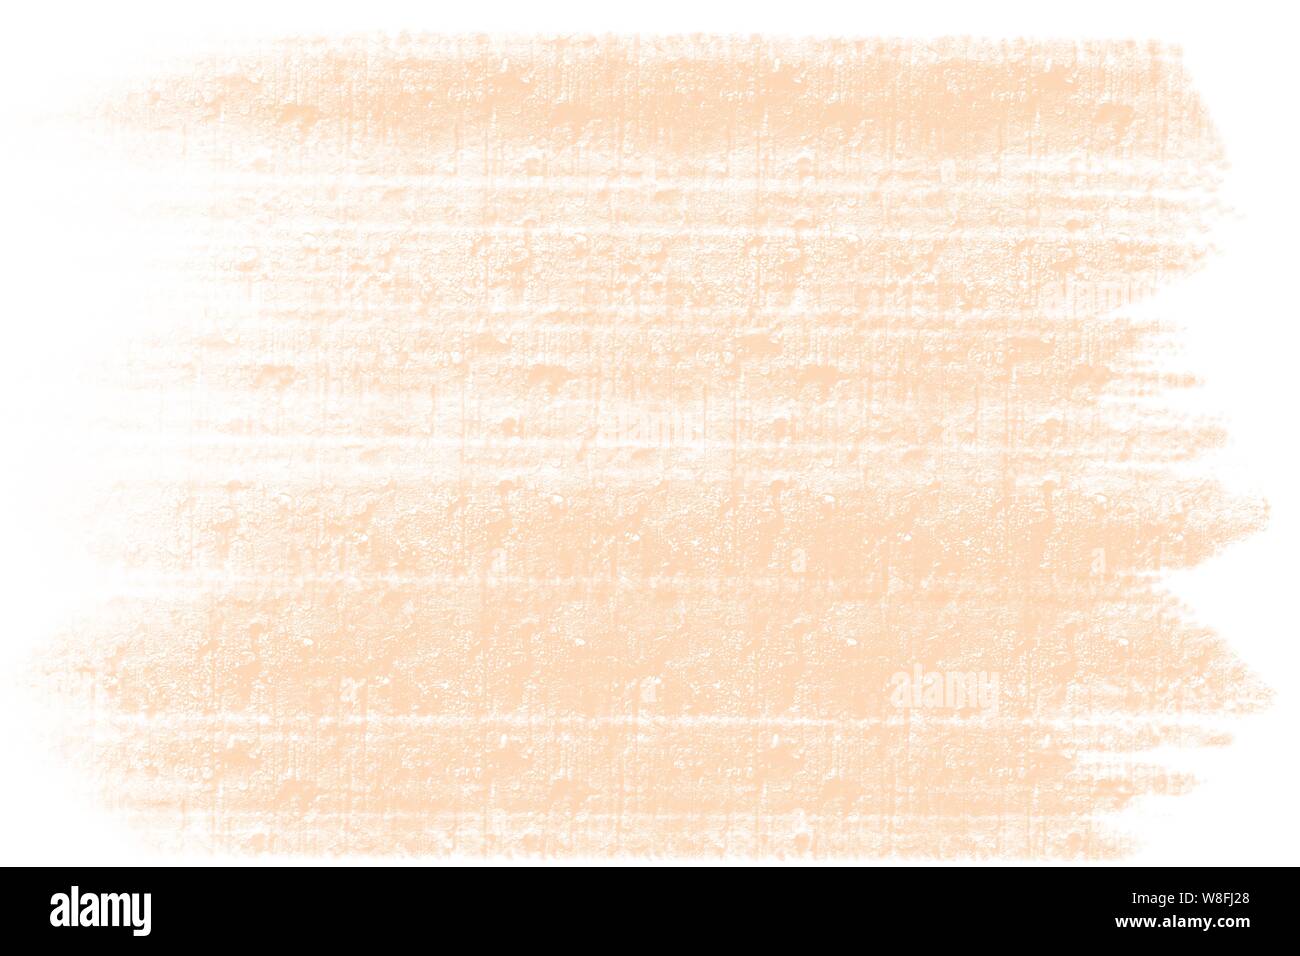 soft orange hand drawn rough brush stroke cement wall tile background pattern with white borders Stock Photo